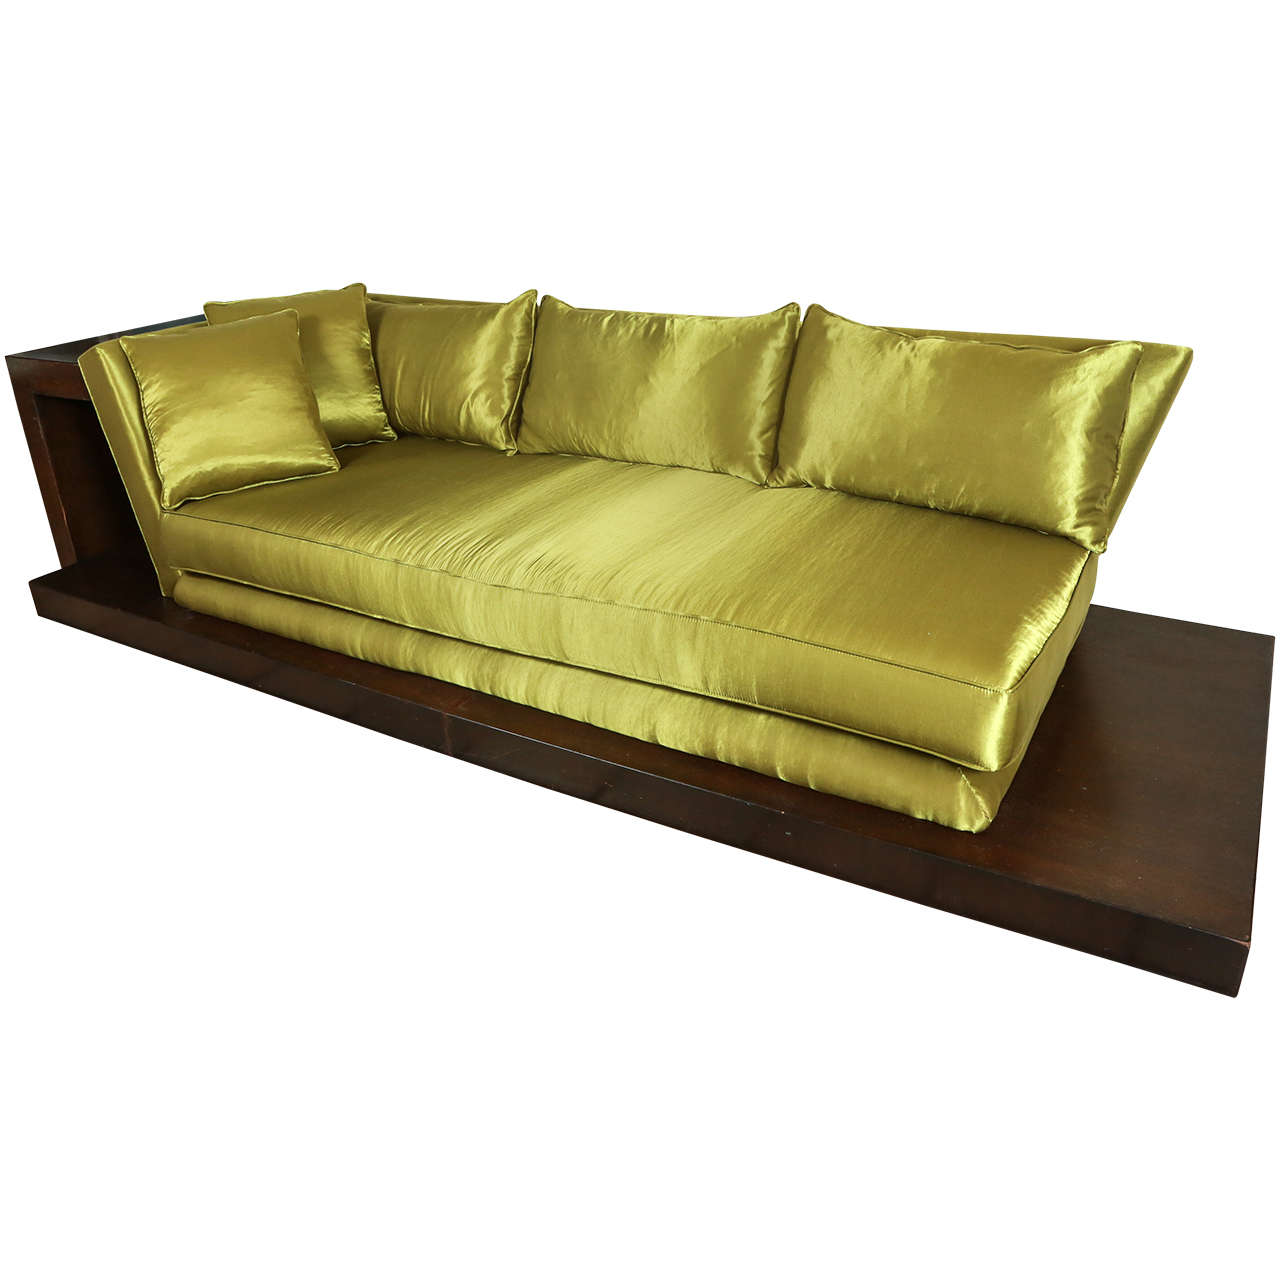 Fabulous and Important "Opium Den" Sofa by James Mont